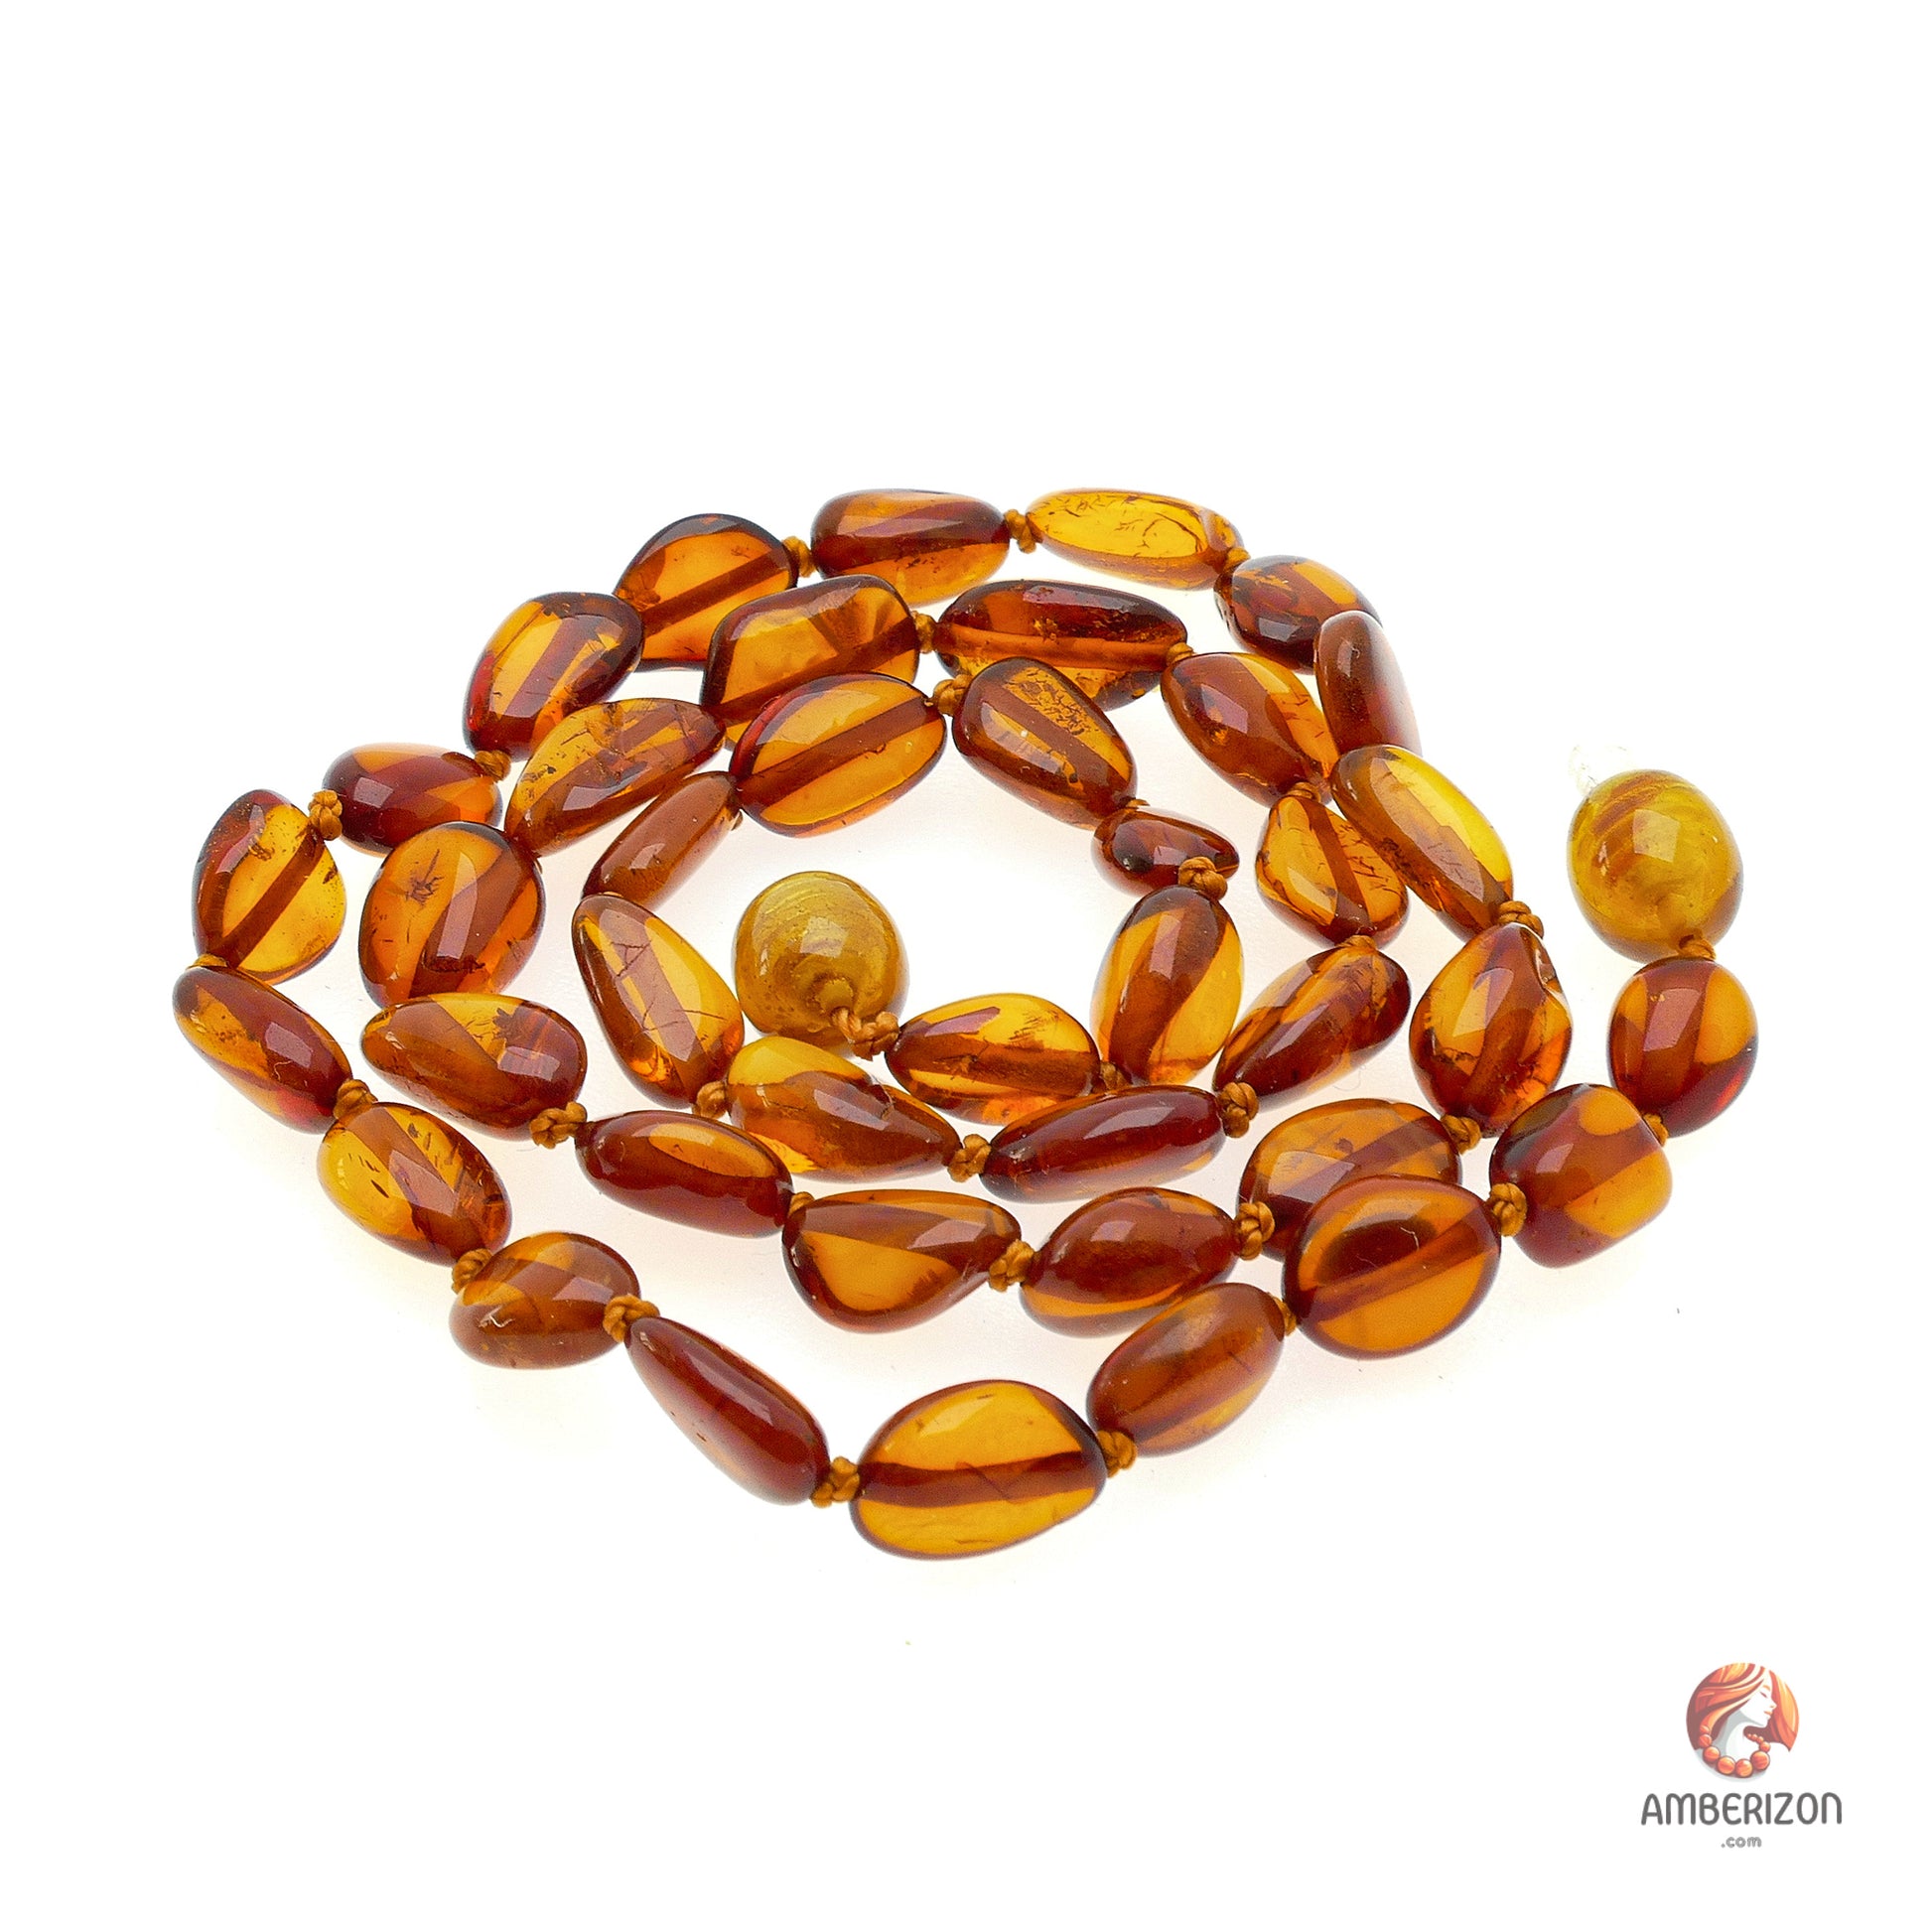 Women's necklace - Translucent cognac polished amber beads